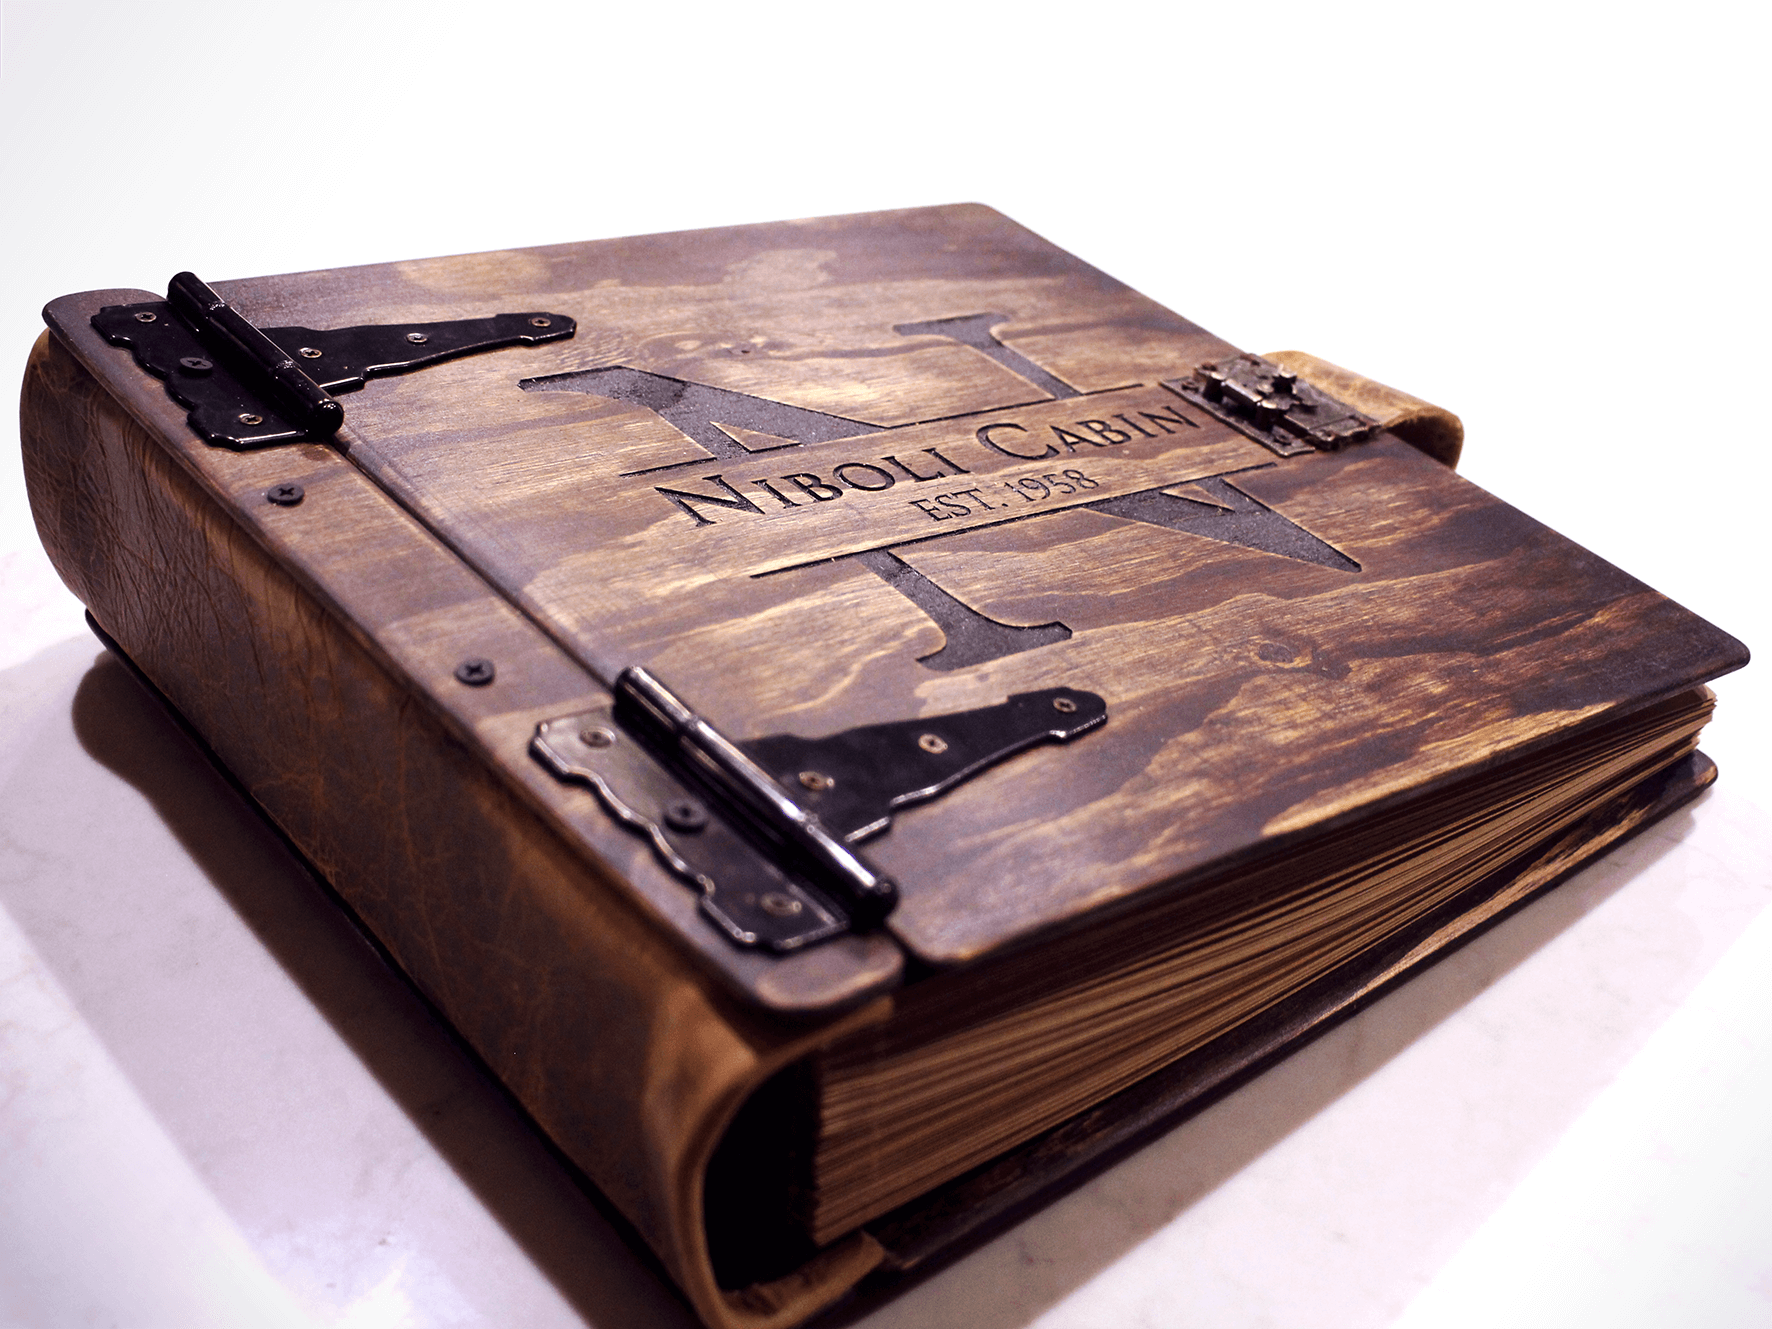 Personalized travel journals and vacation photo album from Rustic Engravings | a unique way to remember your travels. Create a lasting memento of your travels with a personalized travel journal and vacation photo album. Our journals and album are expertly